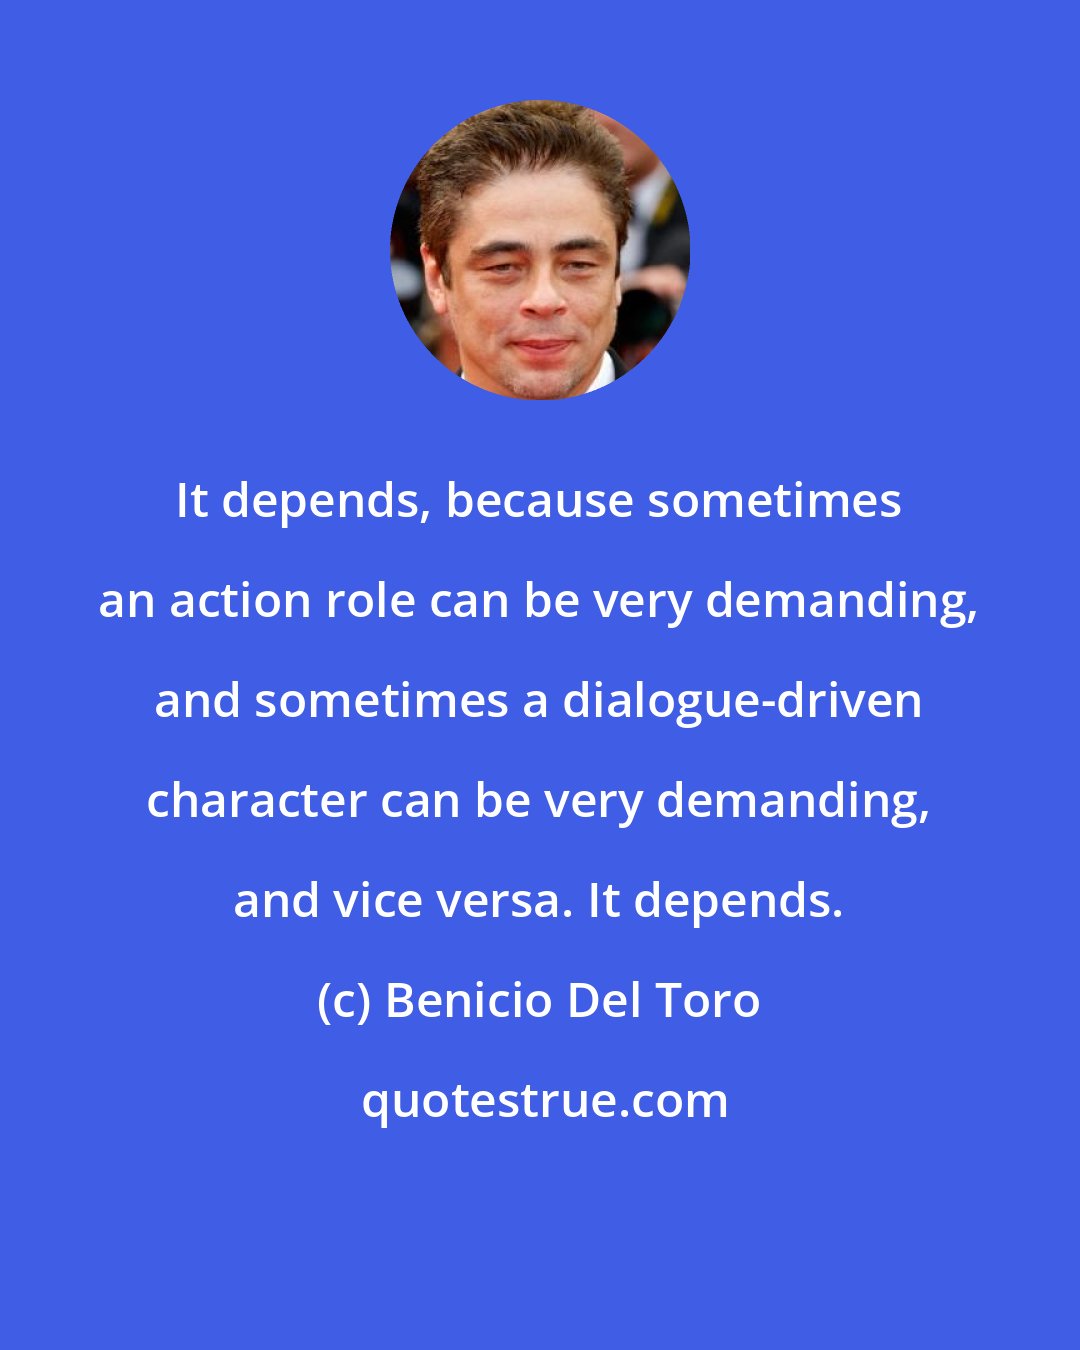 Benicio Del Toro: It depends, because sometimes an action role can be very demanding, and sometimes a dialogue-driven character can be very demanding, and vice versa. It depends.